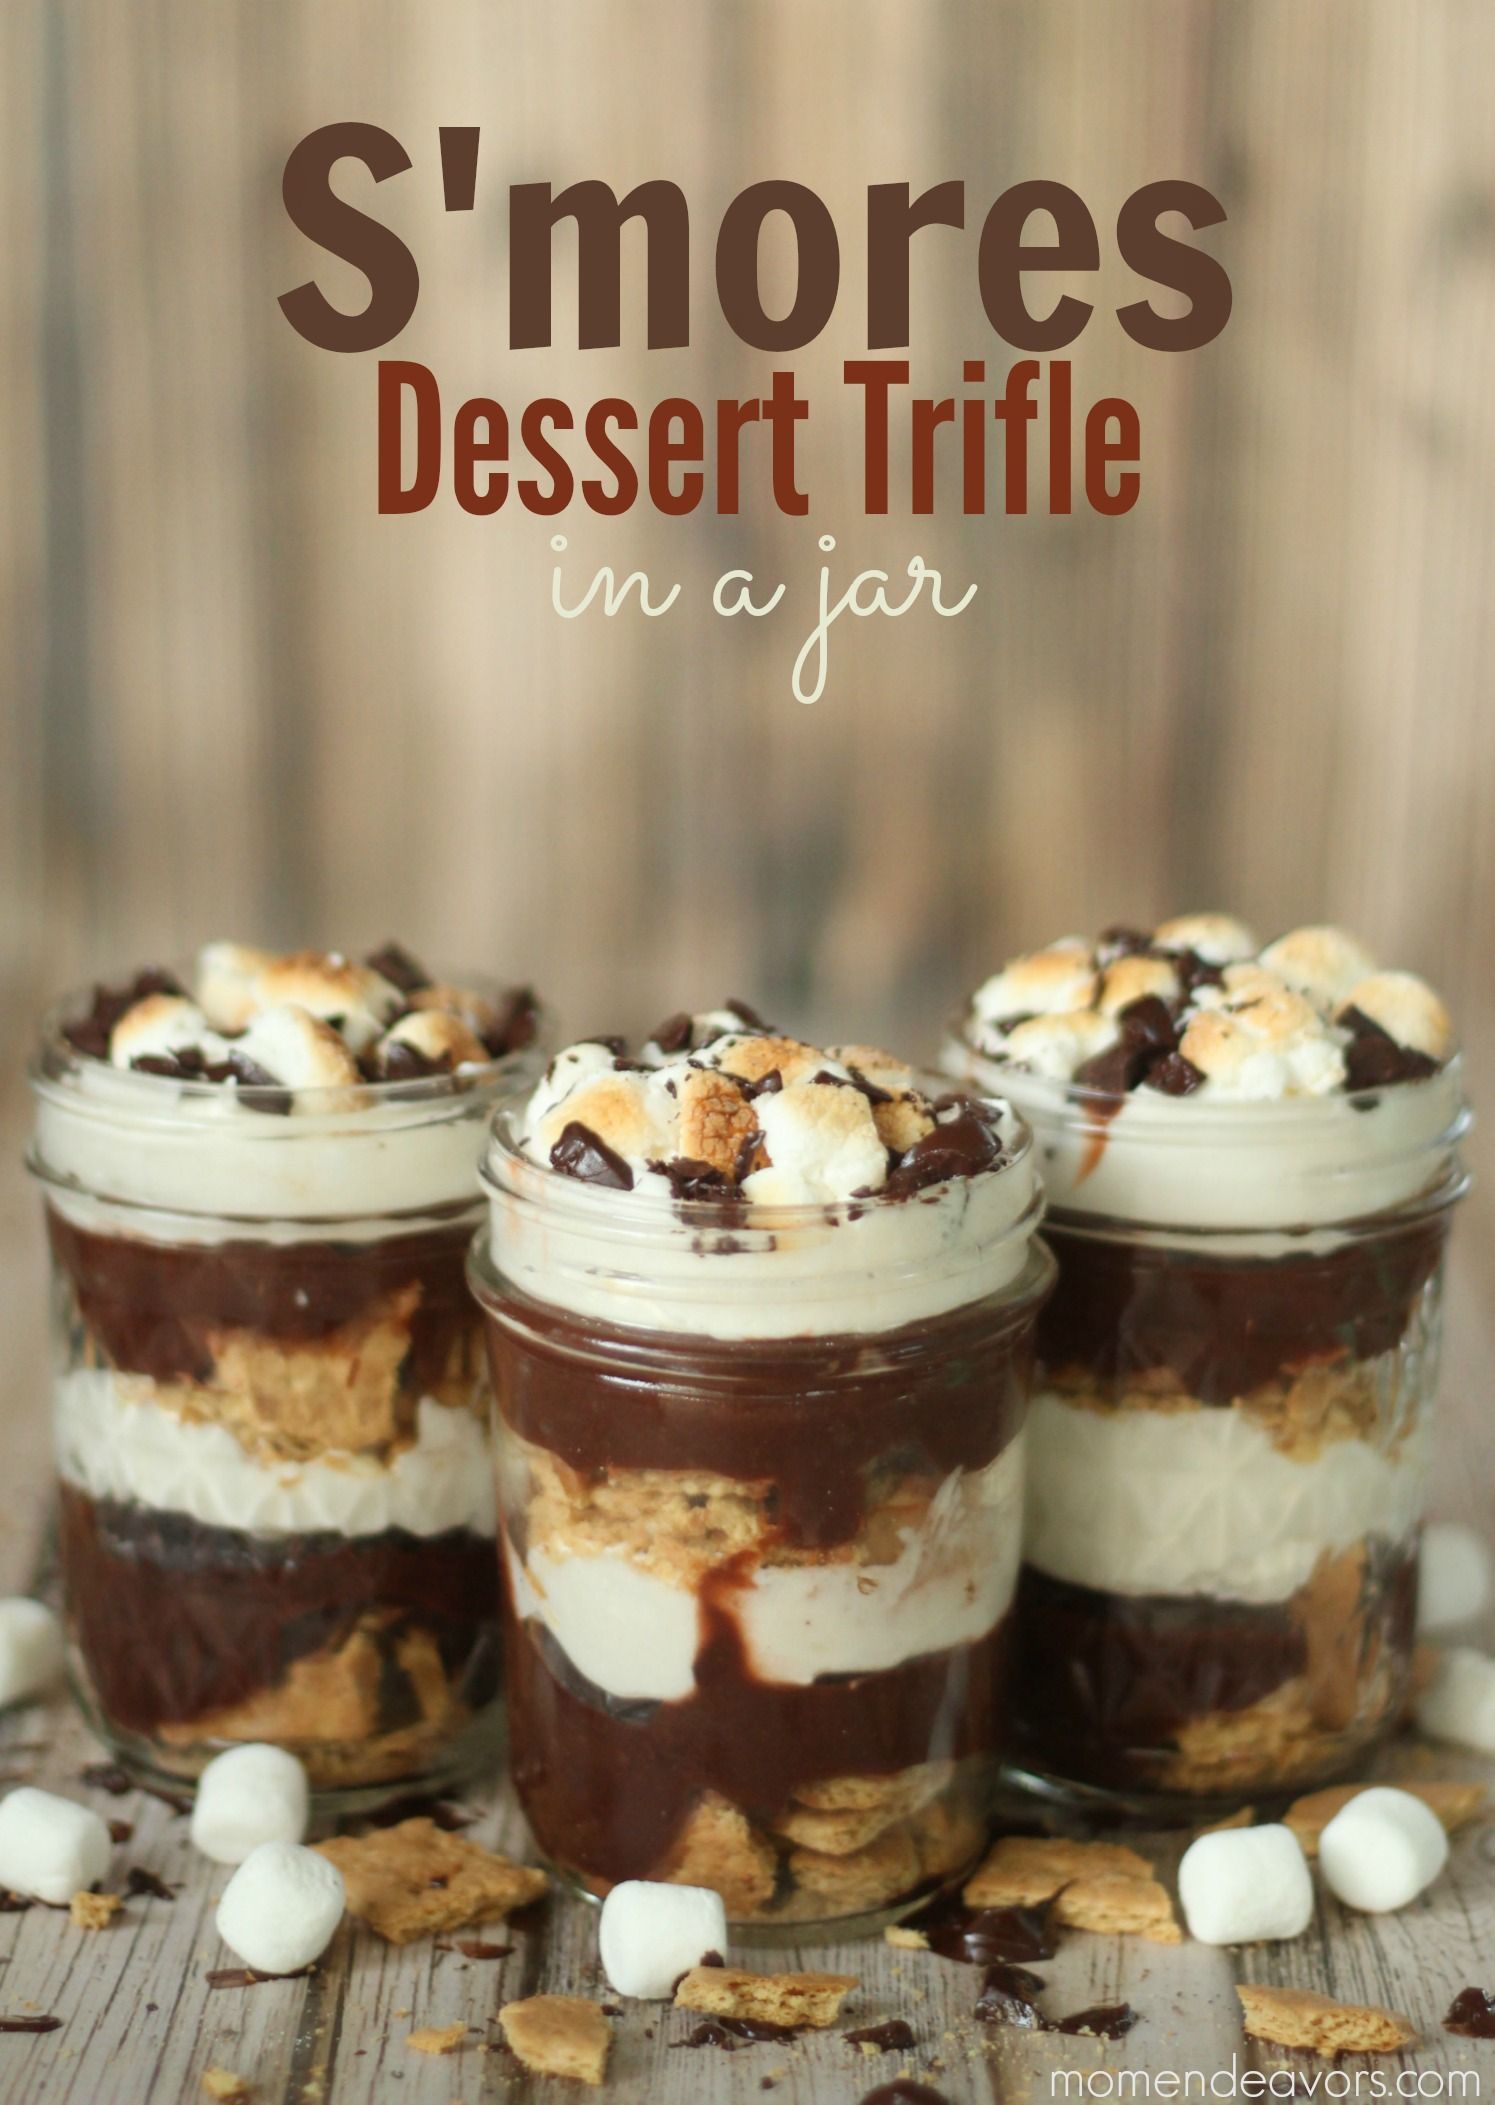 Smores Dessert Trifle in a